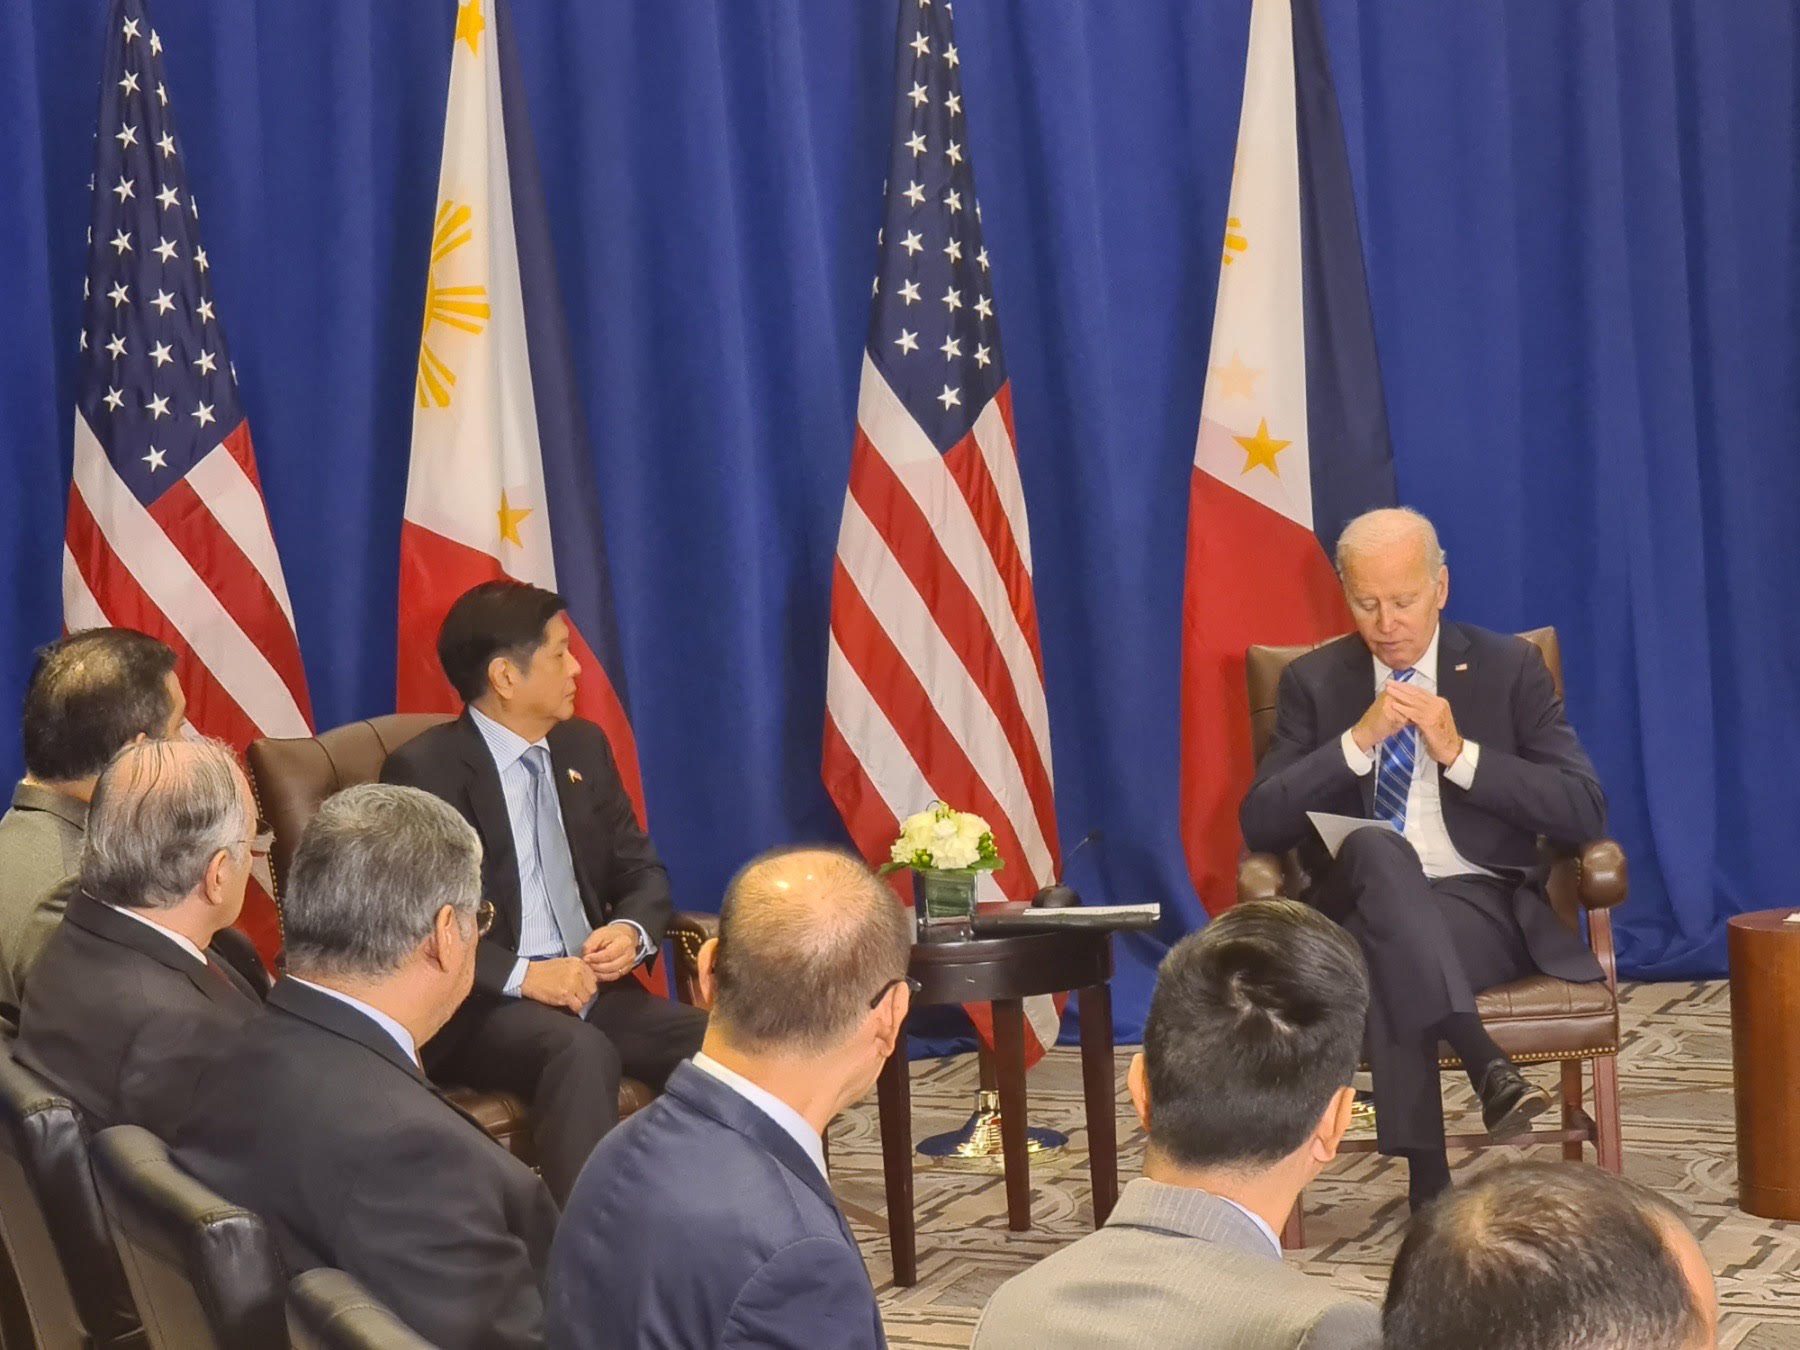 Angeles claims – falsely – that Marcos is Biden’s only bilateral meeting